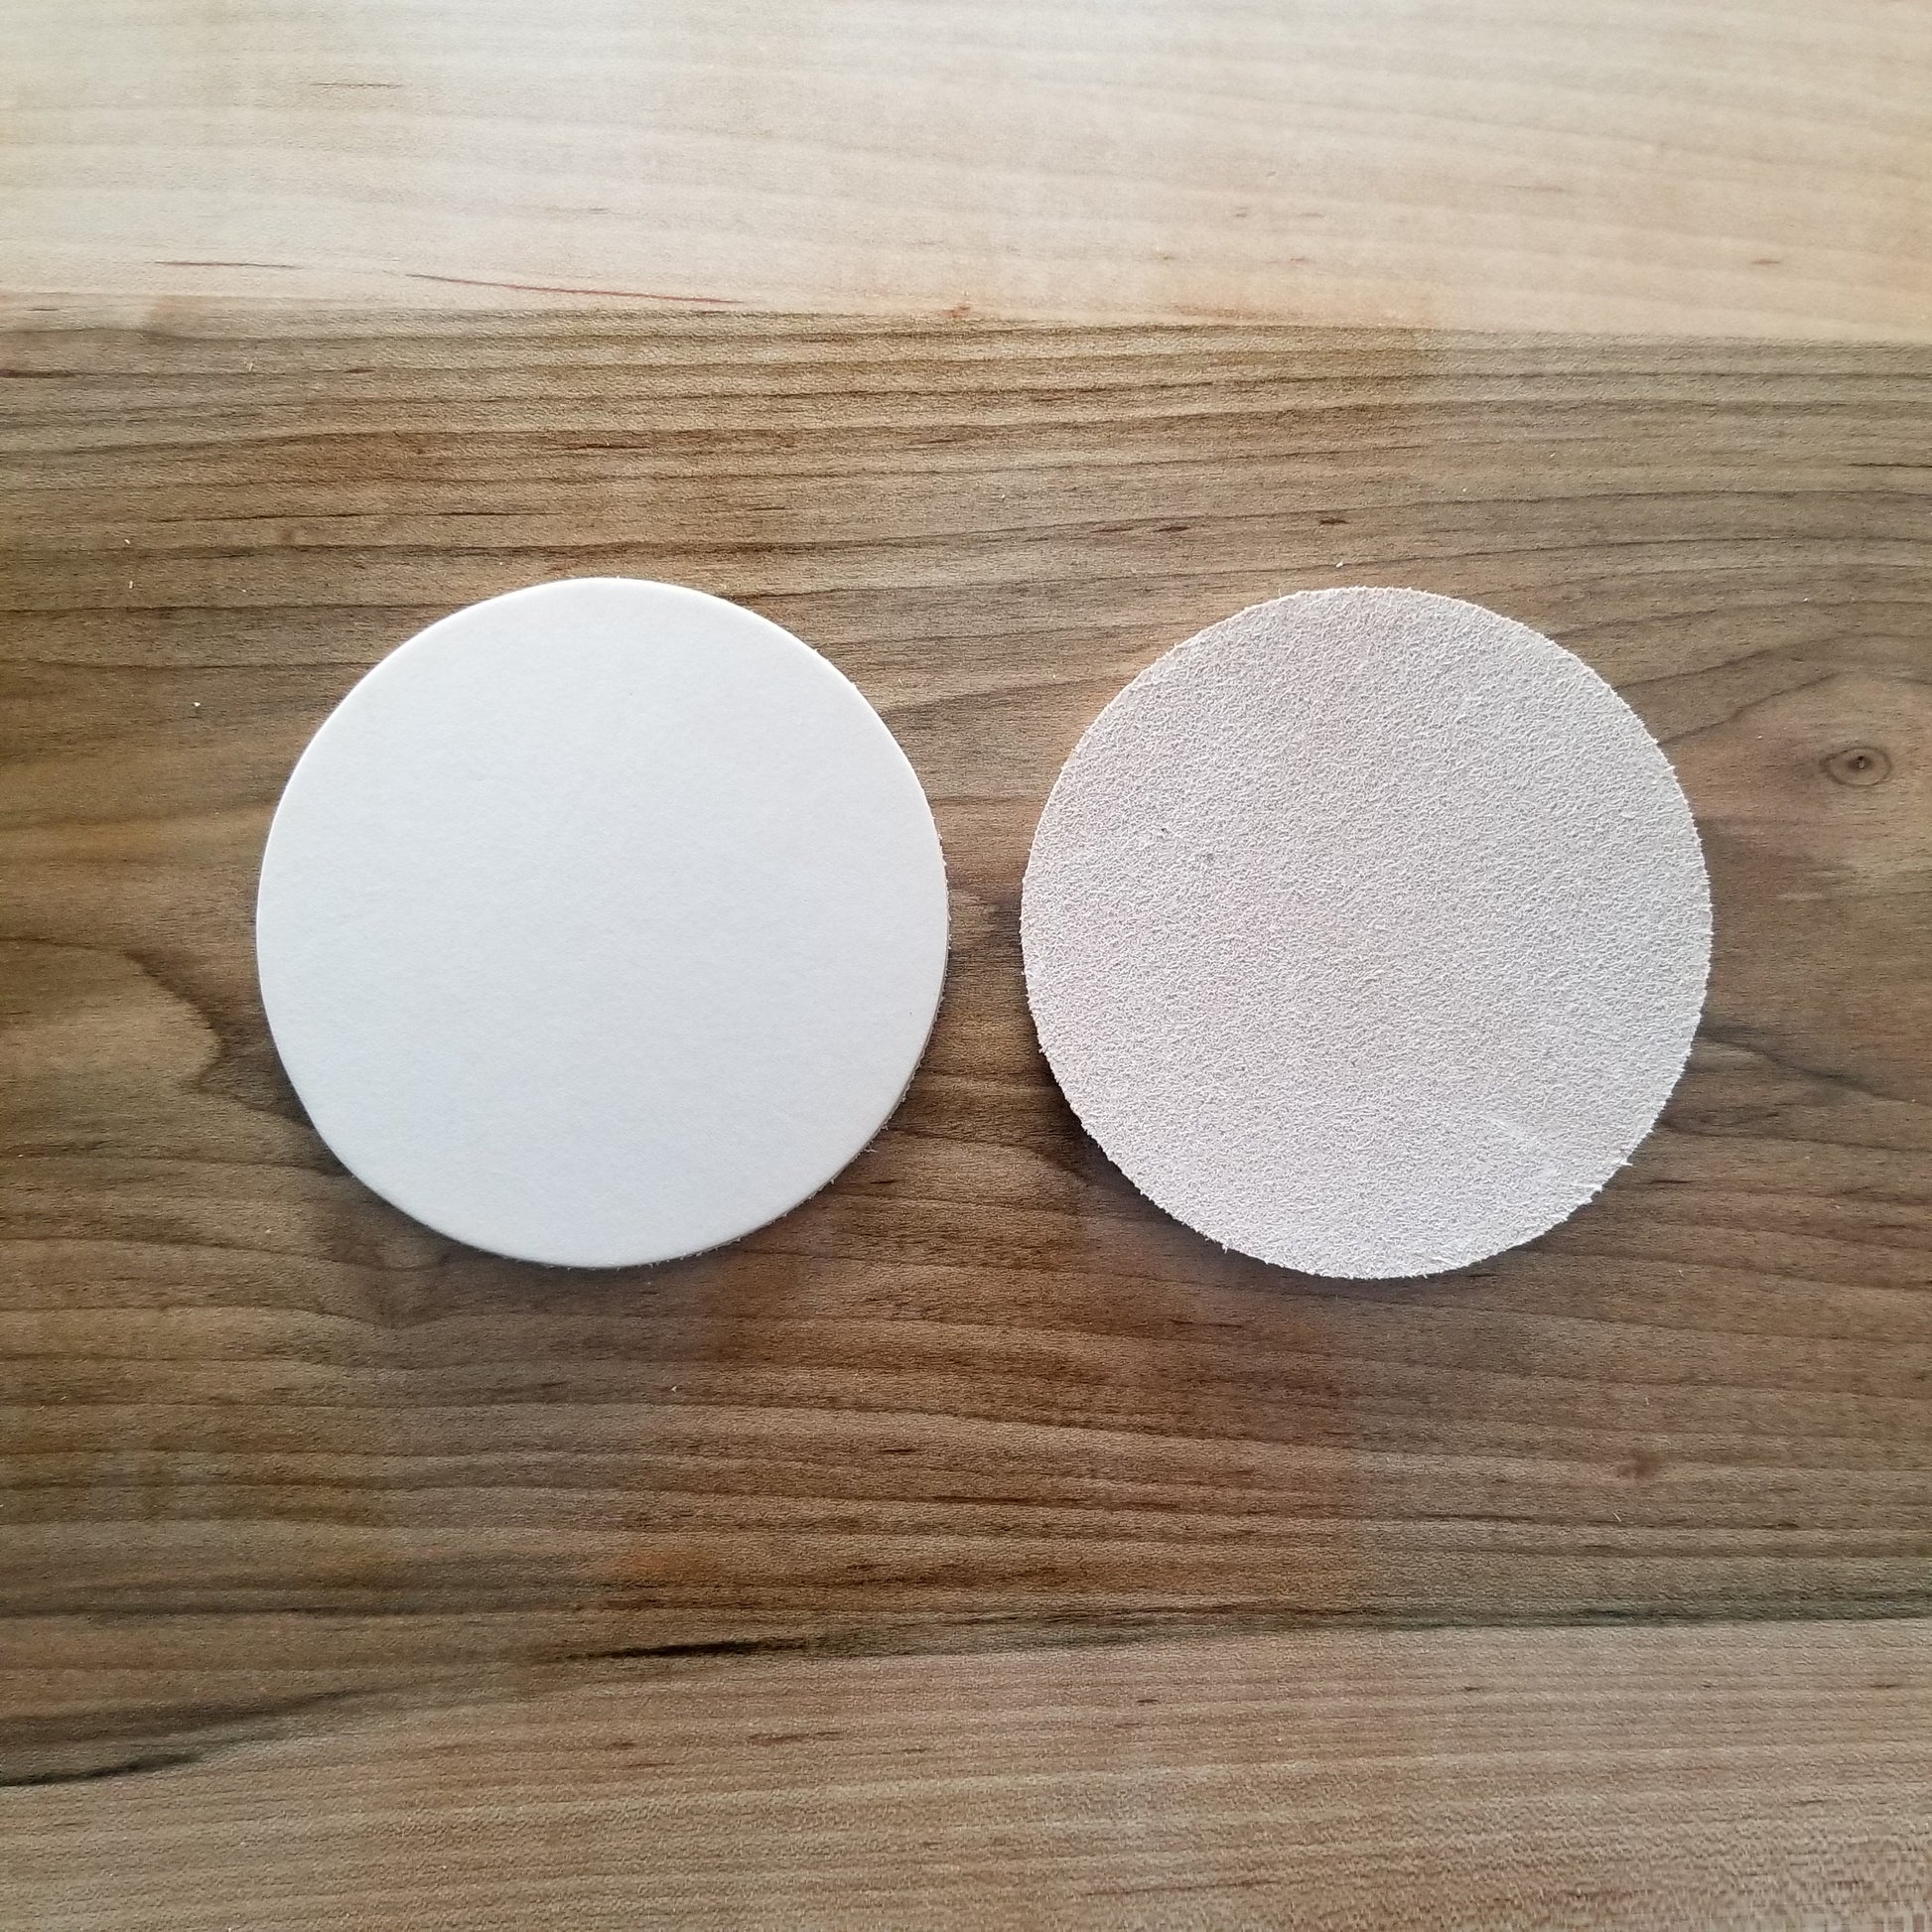 3 in. Round Leather Coaster Blanks